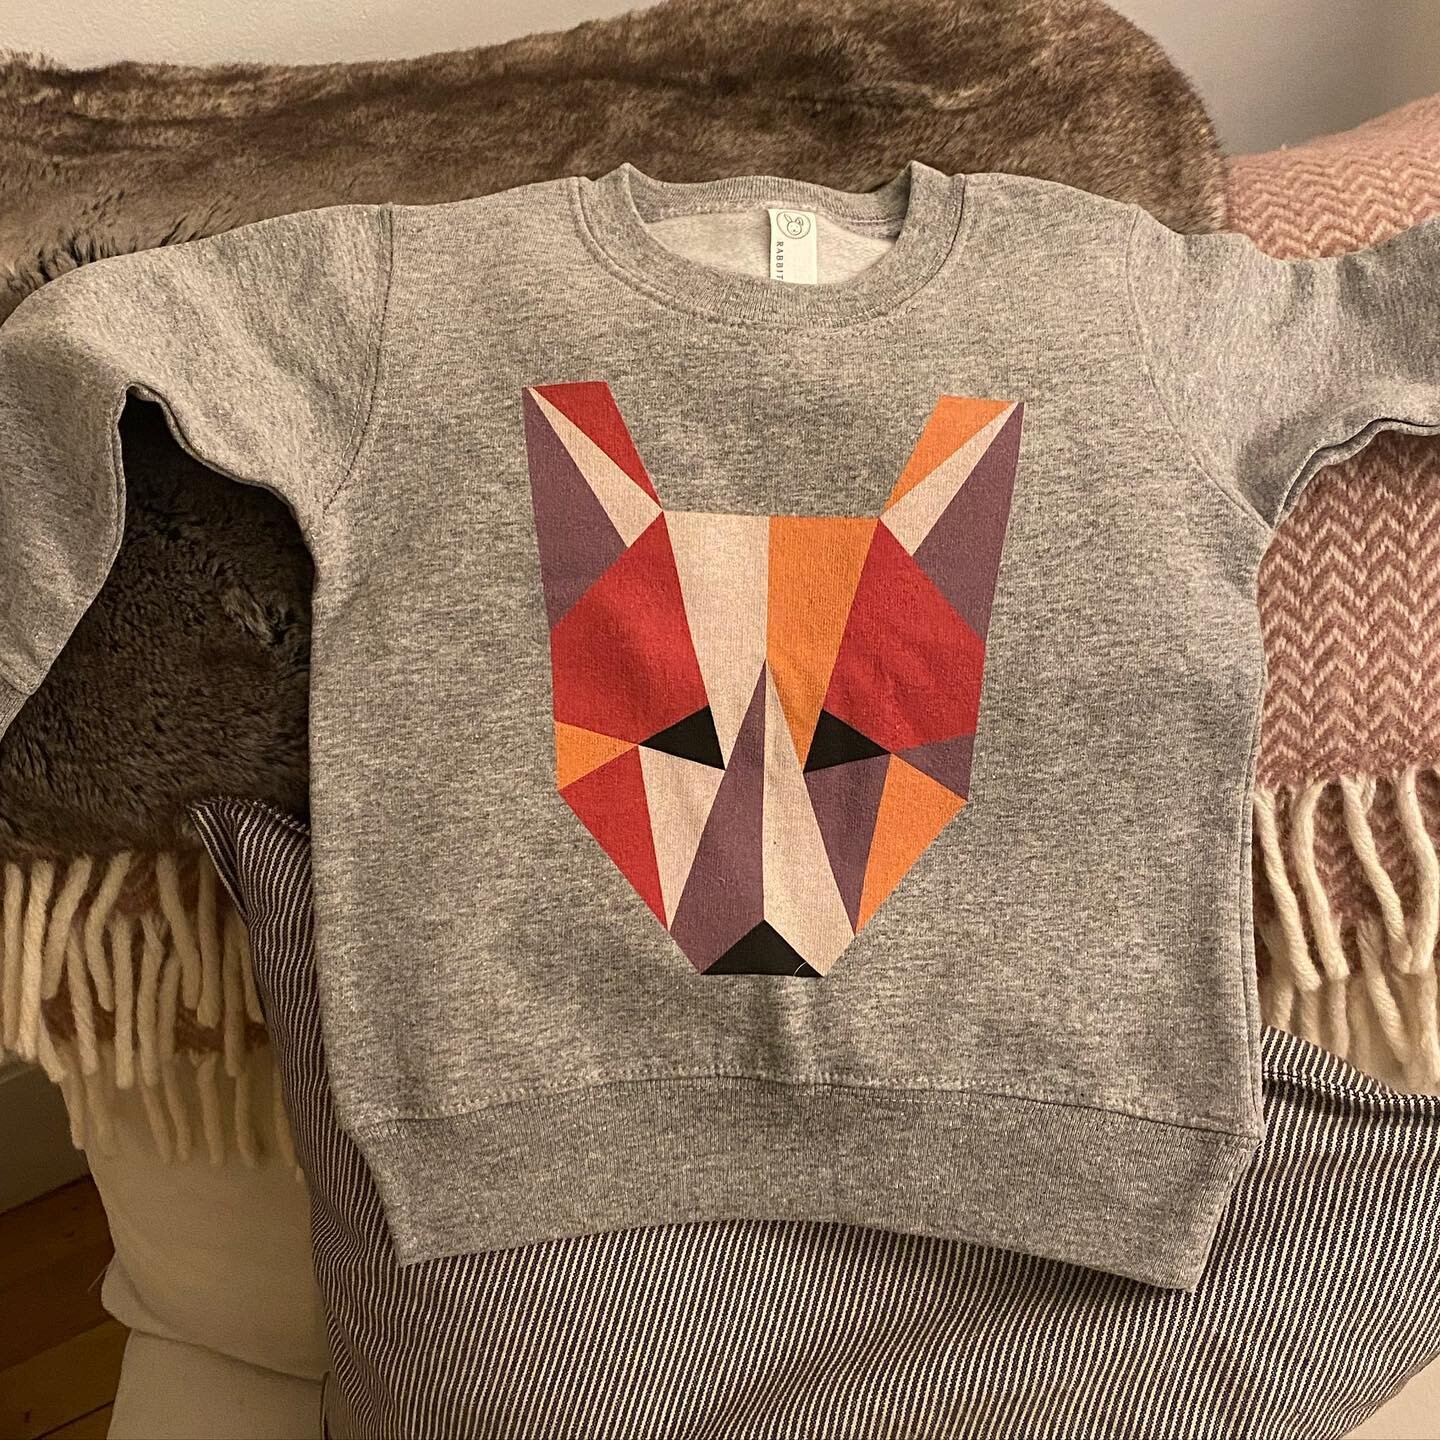 #foxface sweatshirt for Roman who is 18months old. This is a one off, but making me think about a children&rsquo;s line. #treibdesign #graphicdesign #childrensclothing